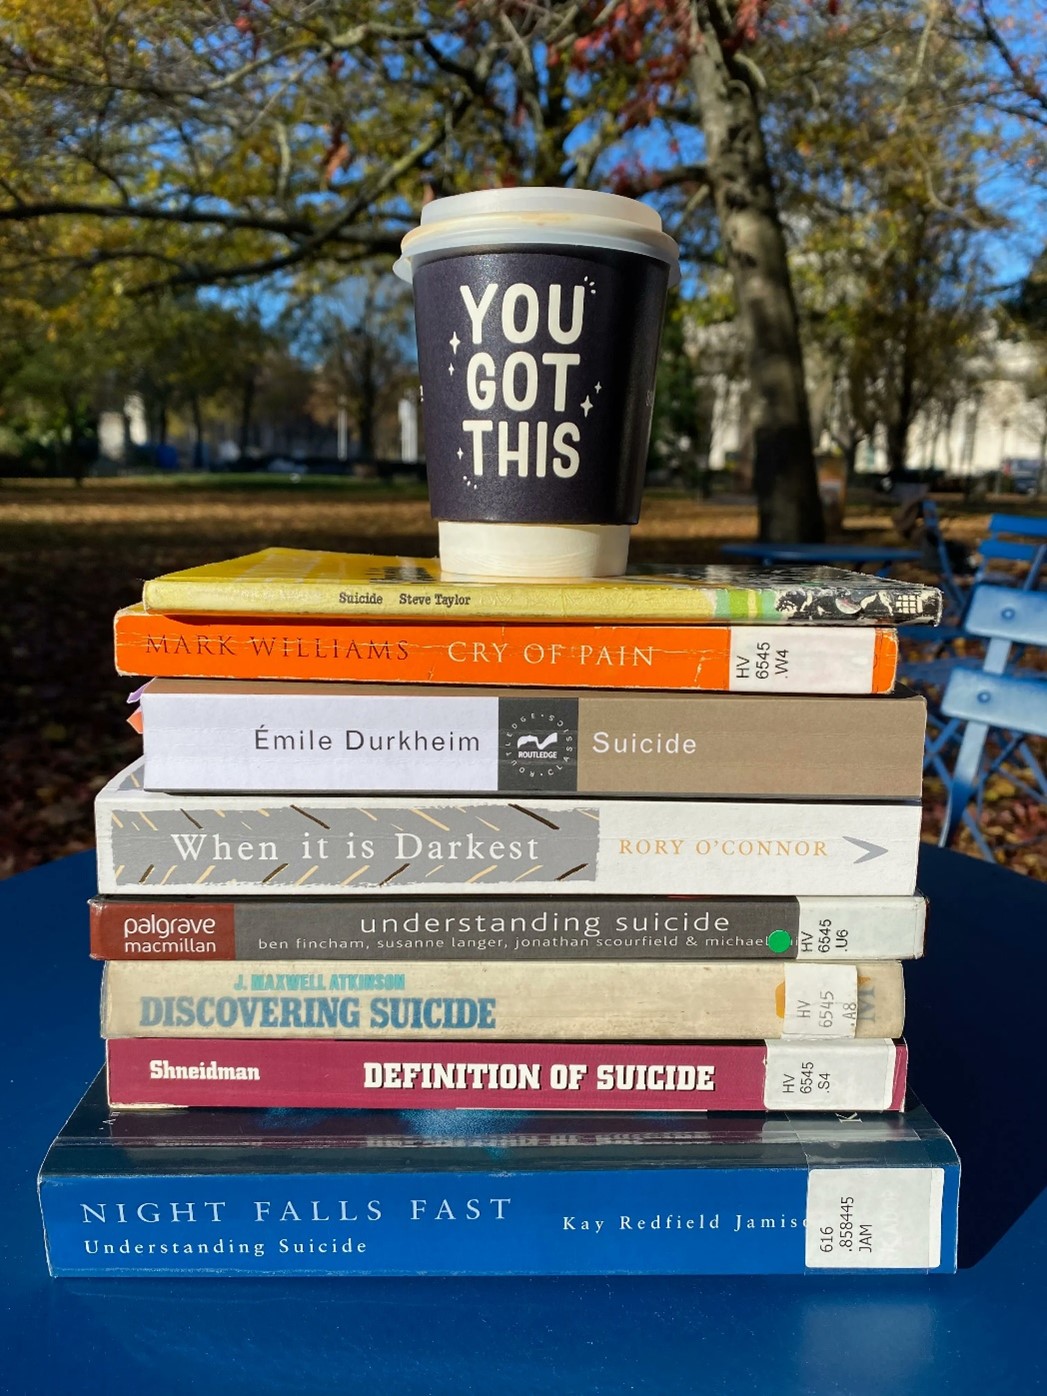 Coffee cup reading 'You got this' atop a pile of books.